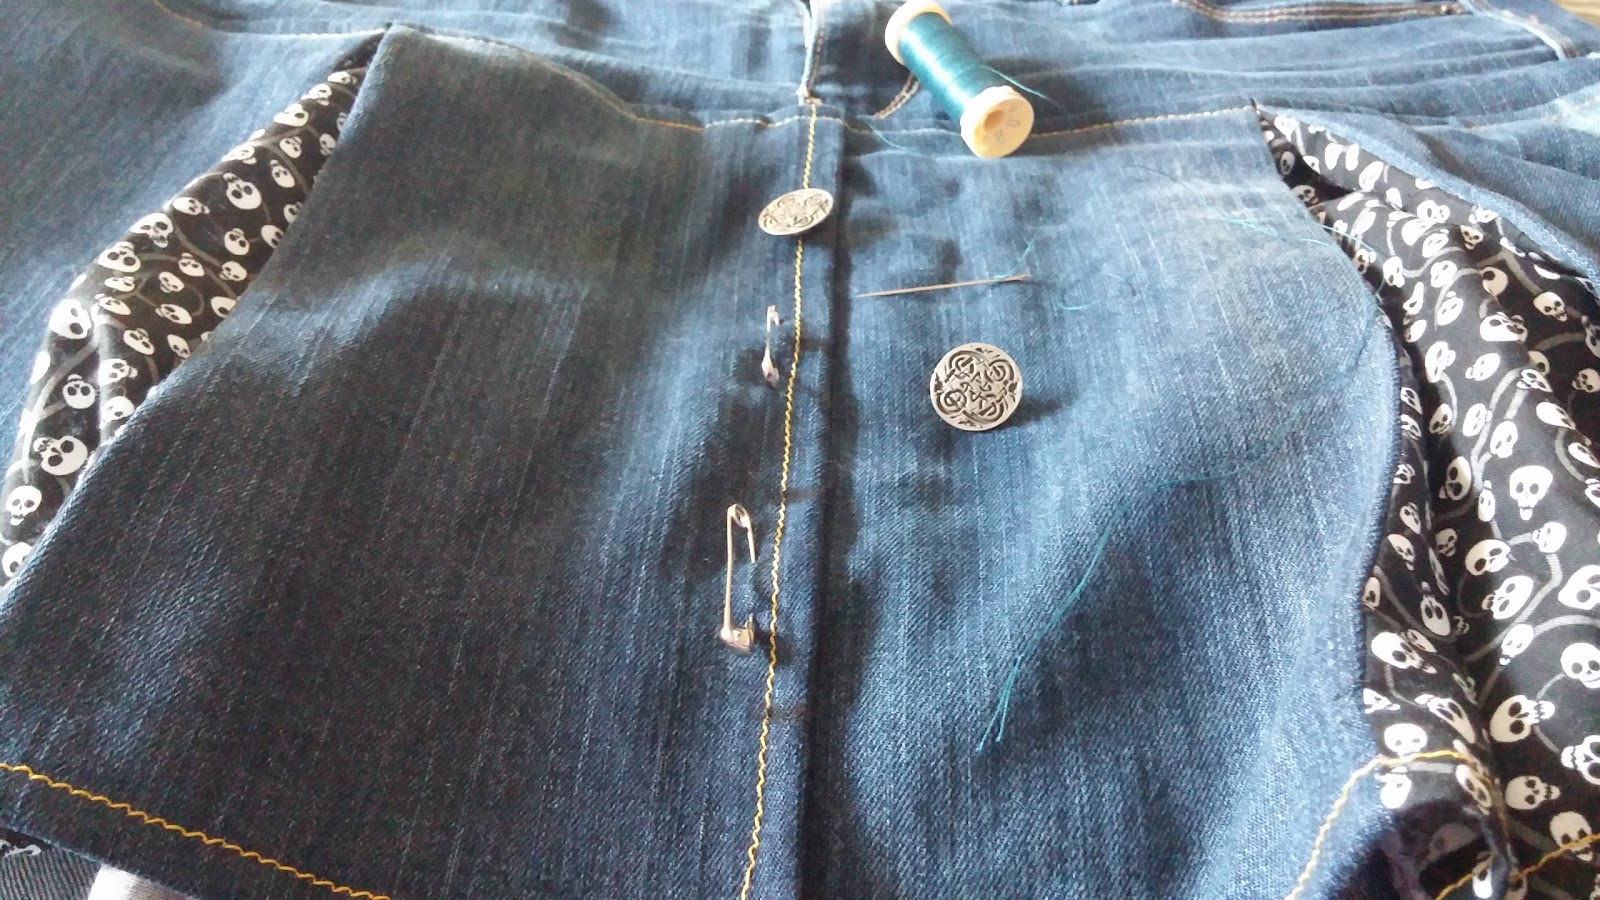 Upcycling Old Jeans - Wistful Wanderings